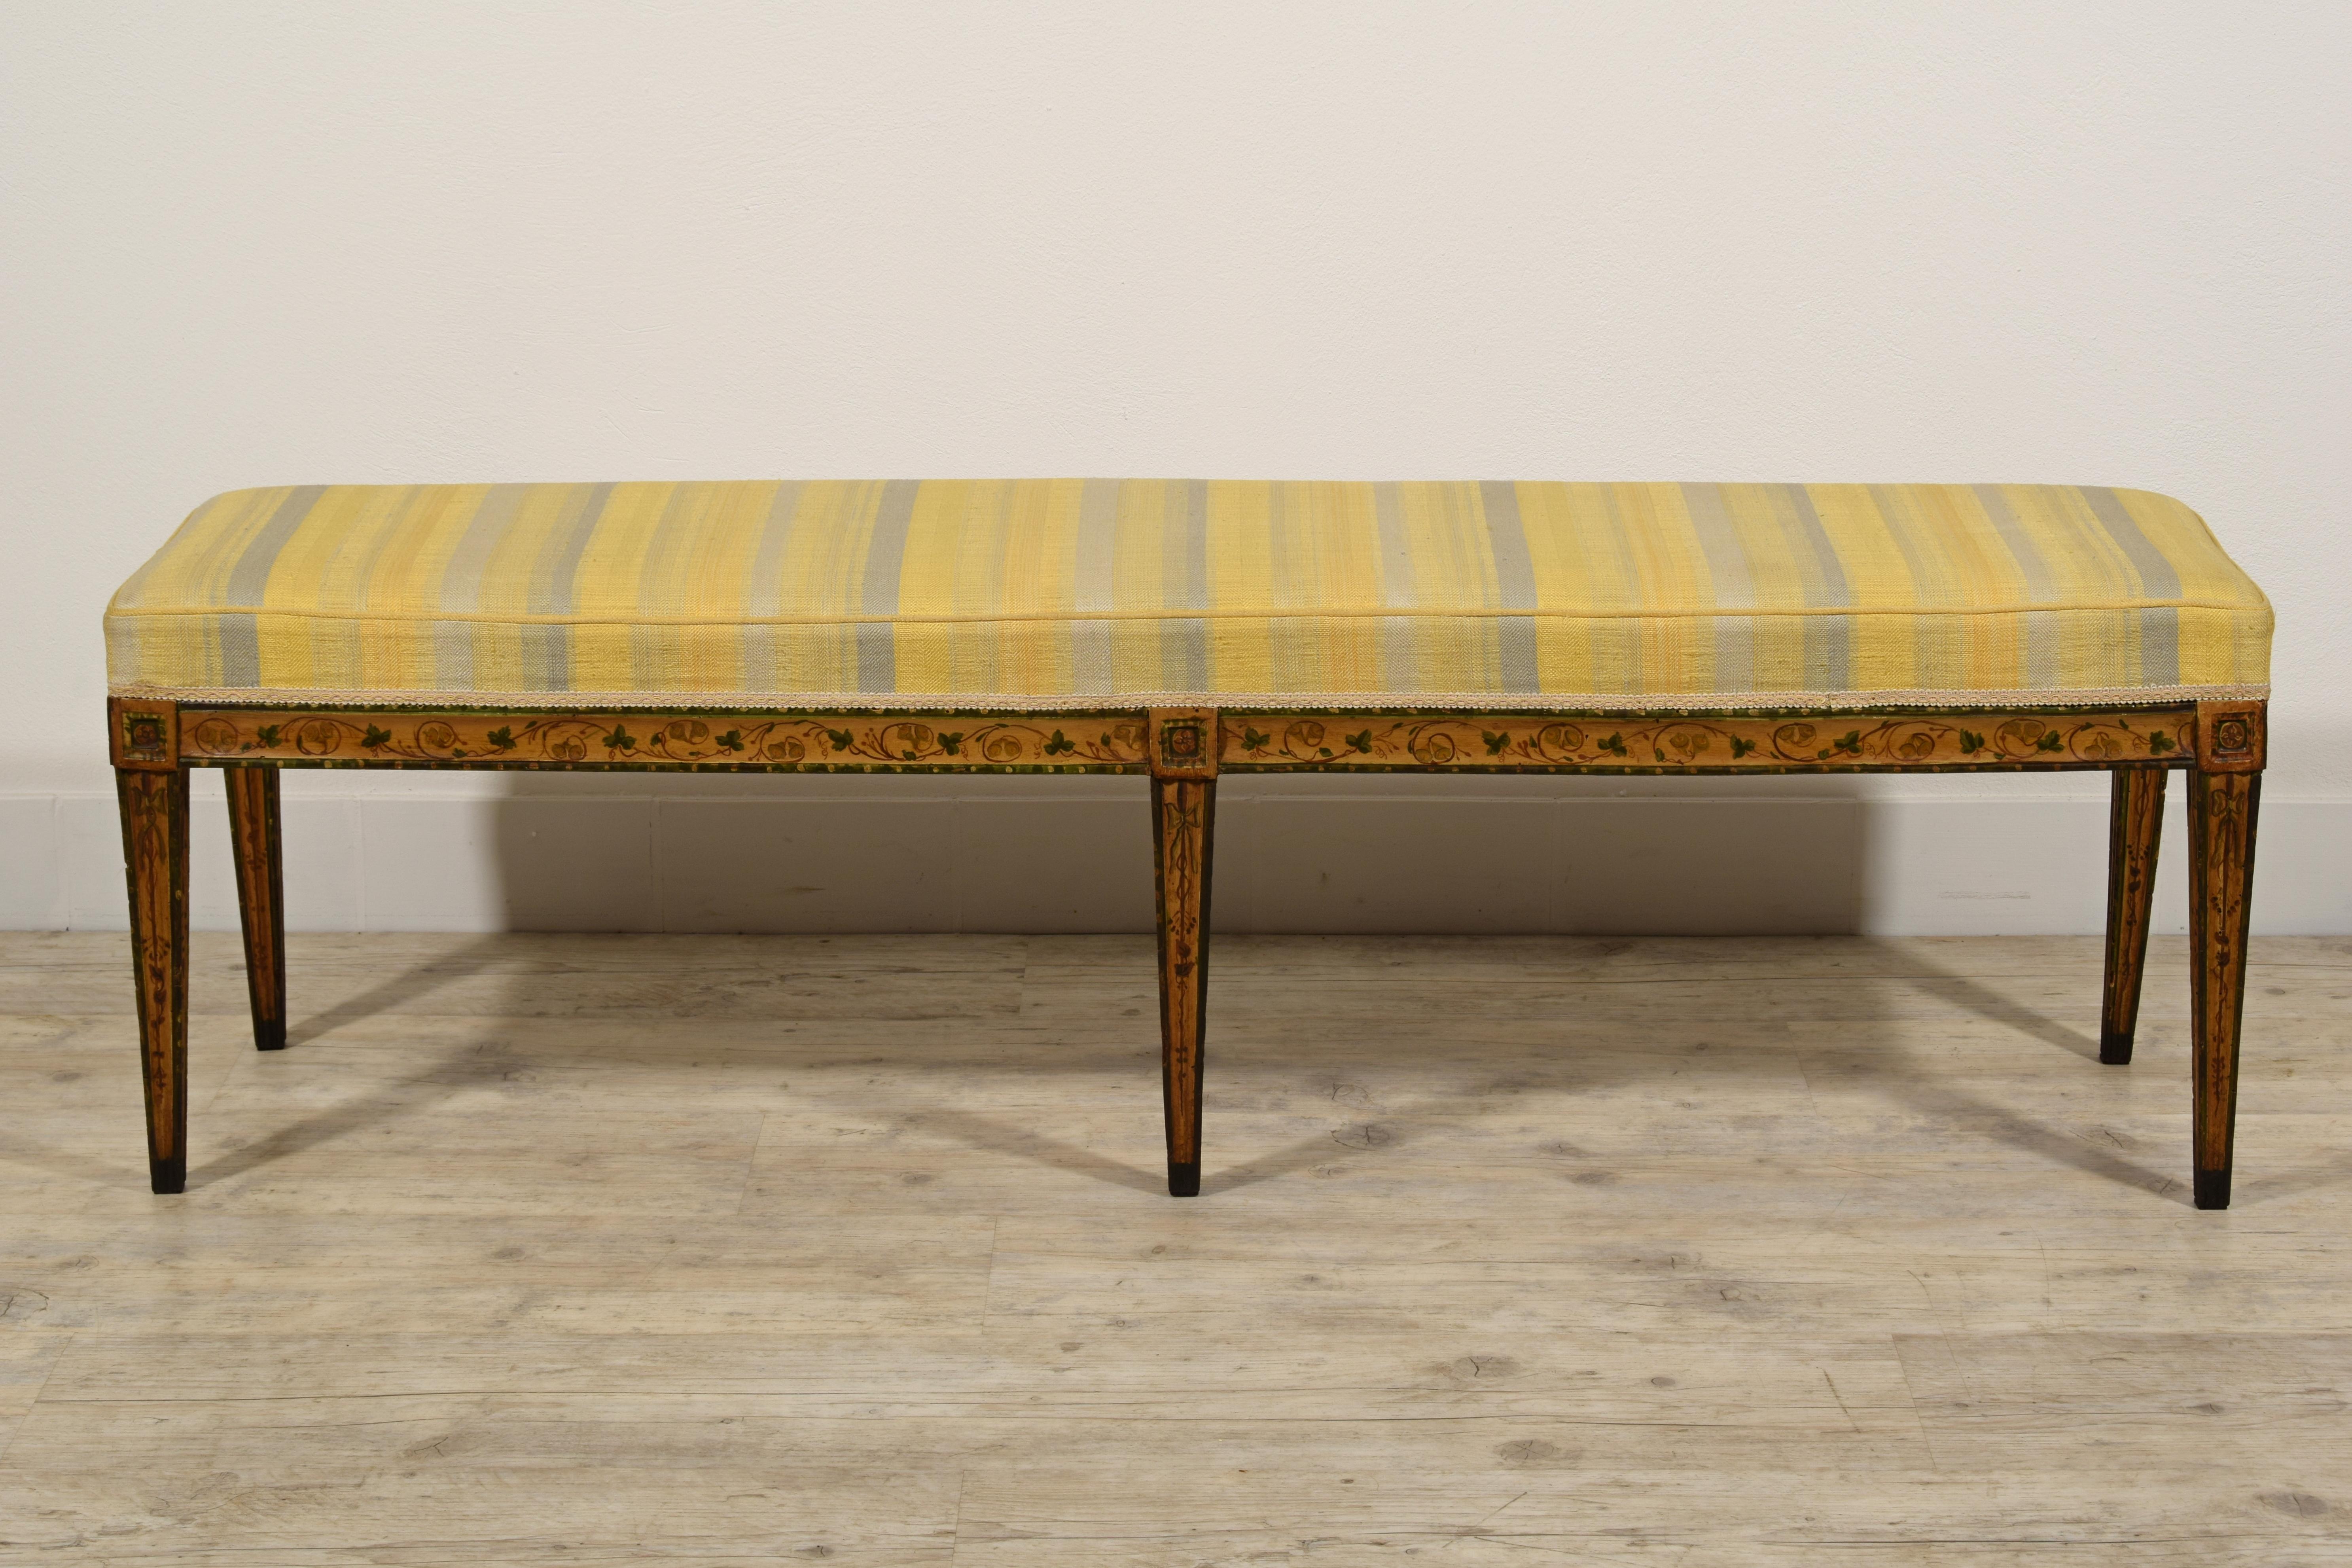 19th Century, Italian Six-legged Centre Bench Lacquered Wood with Ramage Motive 1